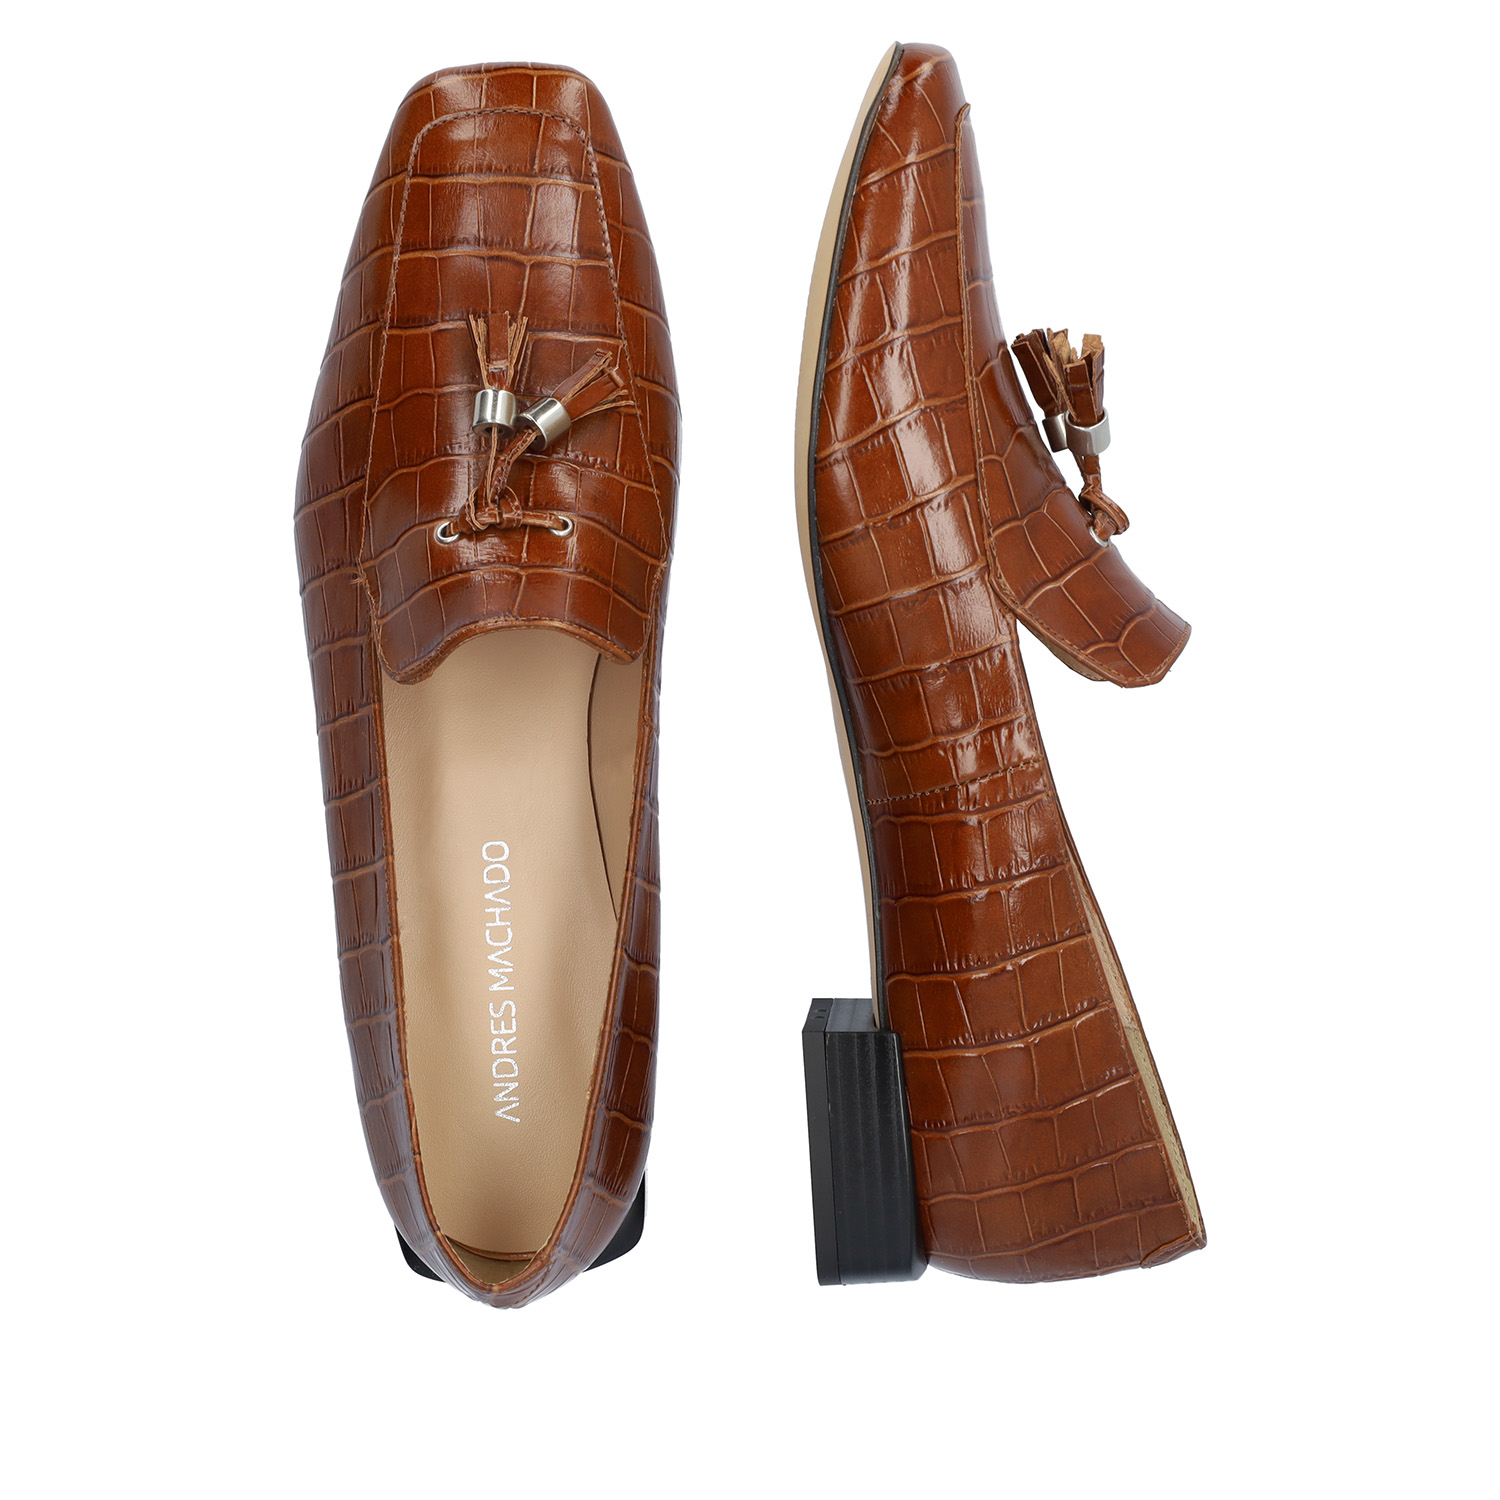 Saddle Coco leather loafers 